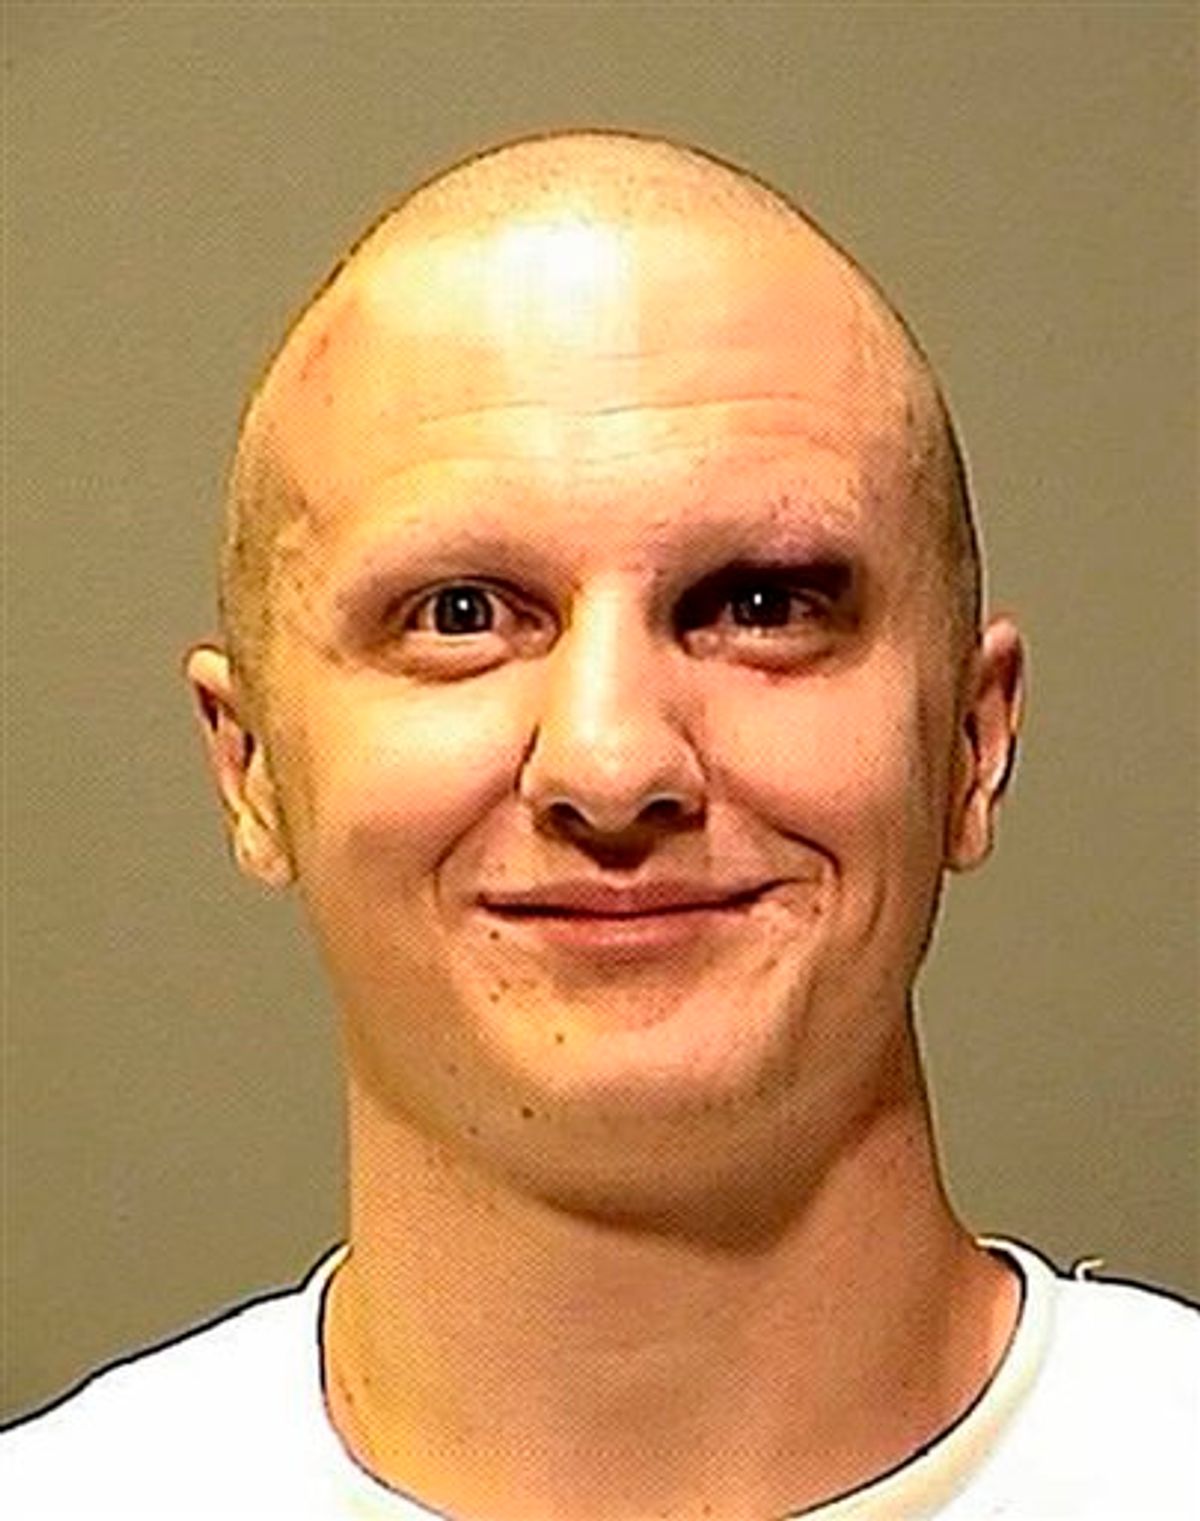 FILE - This Jan. 8, 2011 file photo released by the Pima County Sheriff's Office shows Jared Loughner, charged with shooting Rep. Gabrielle Giffords. Loughner was ordered removed from a mental competency hearing to determine whether he is mentally competent to stand trial and assist in his defense, after an outburst  in court  Wednesday, May 25, 2011 in Tucson, Az.  (AP Photo/Pima County Sheriff's Dept. via The Arizona Republic, File)  (AP)